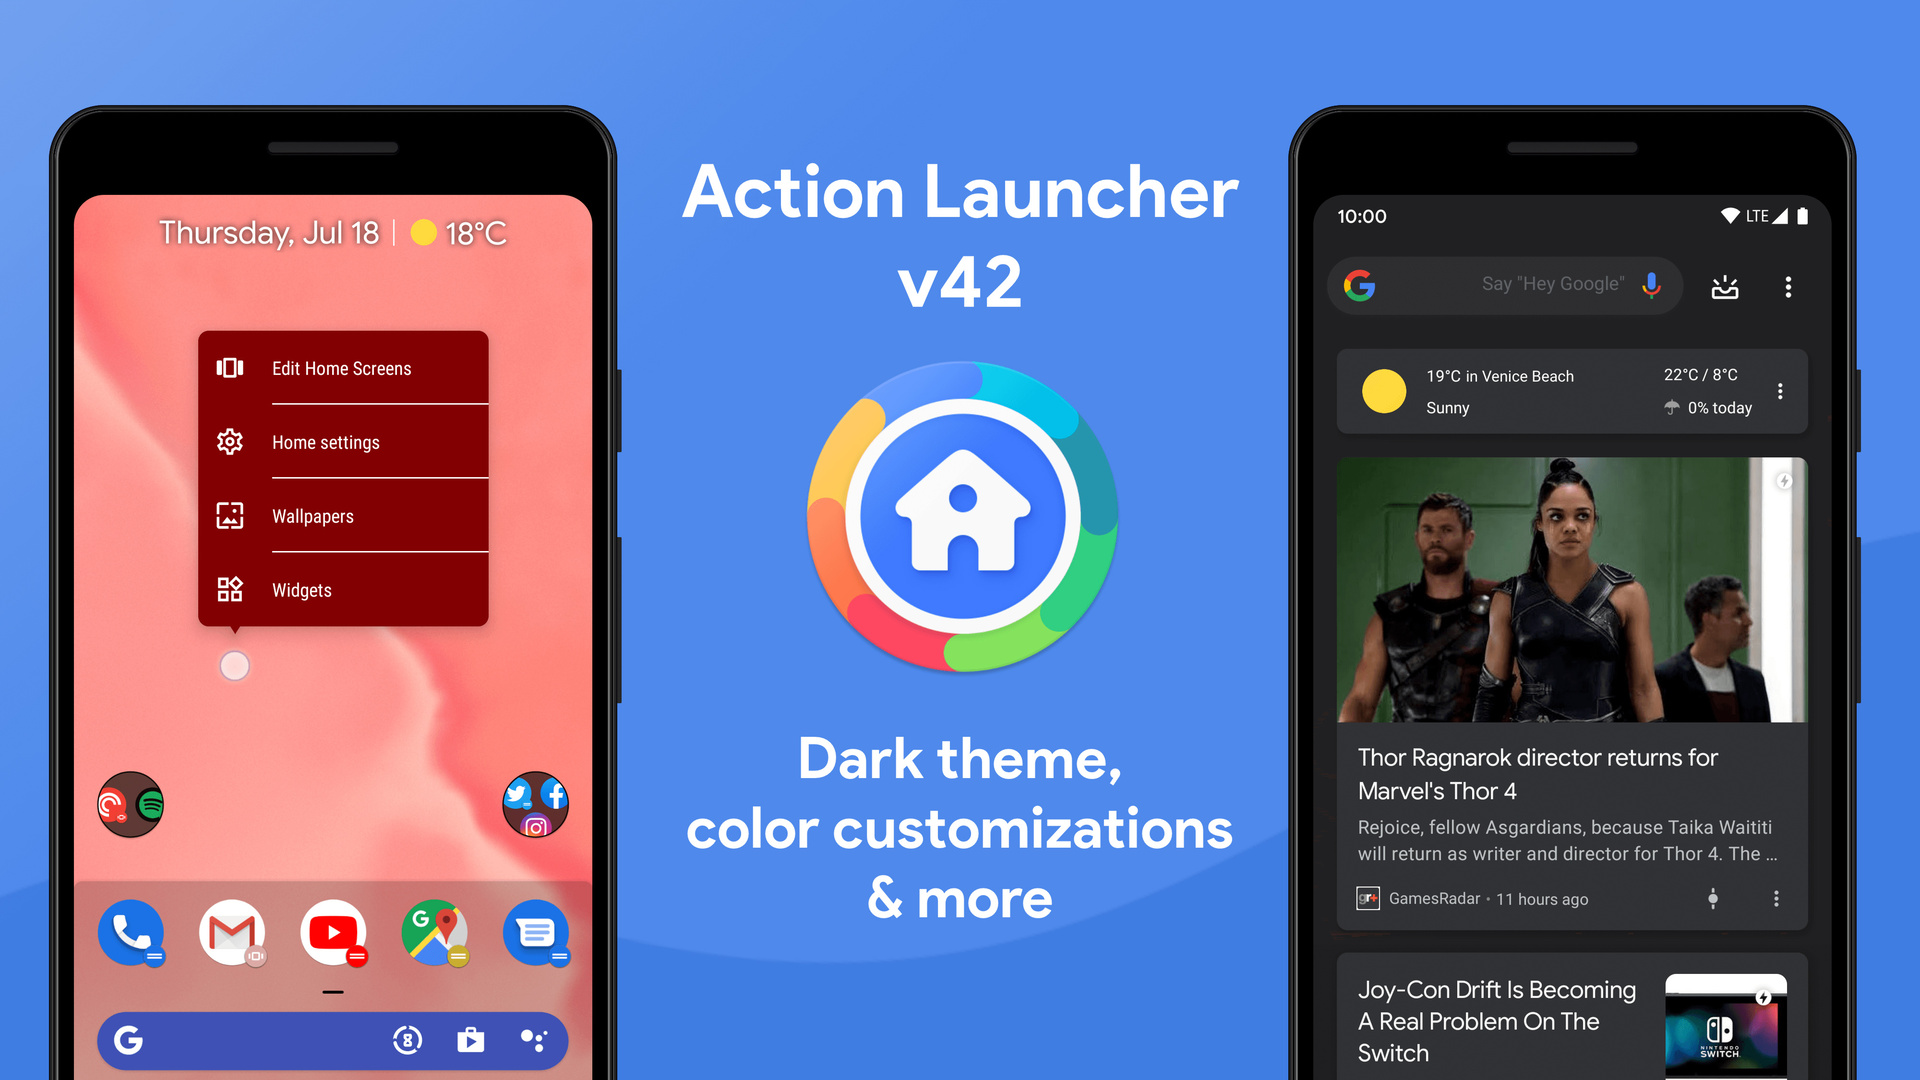 Image of Action Launcher version 42